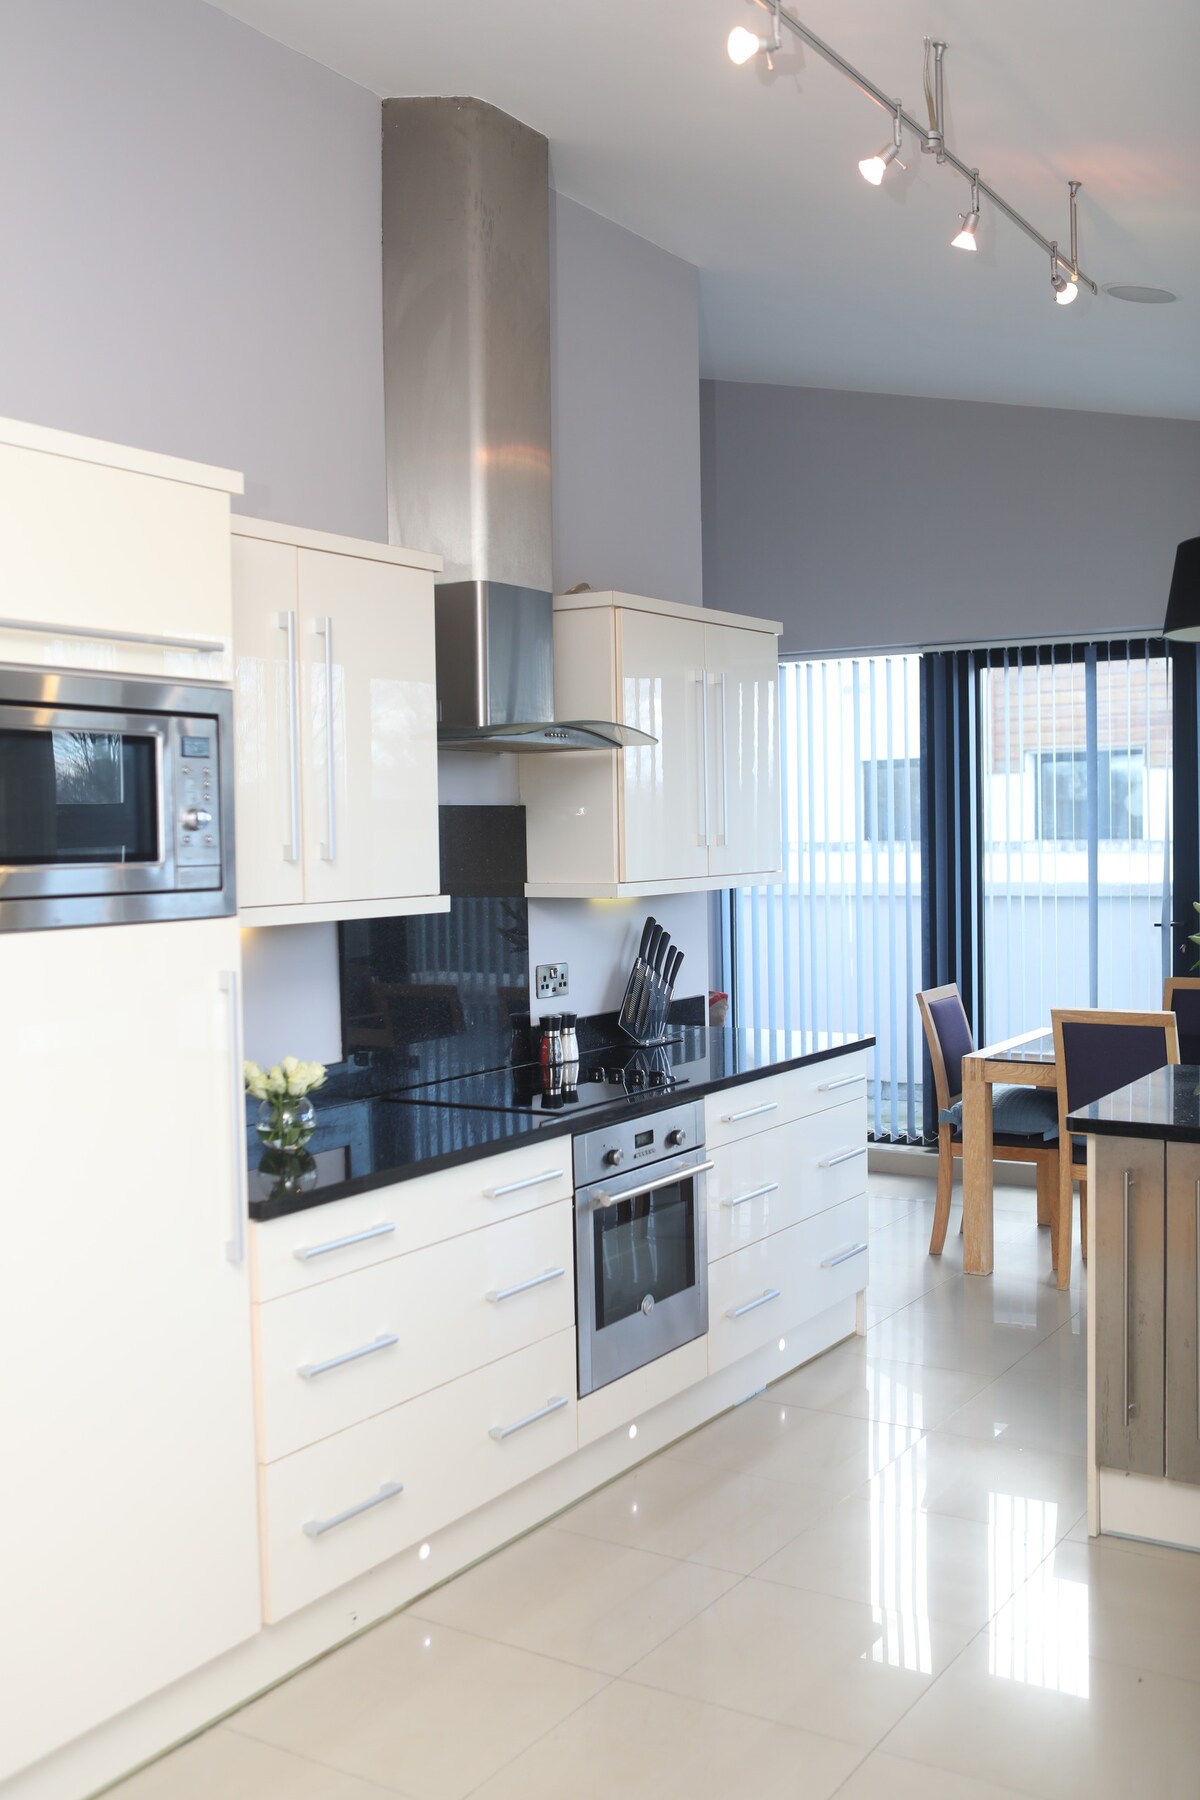 Luxury 3 bed penthouse apartment, Foxford Co. Mayo